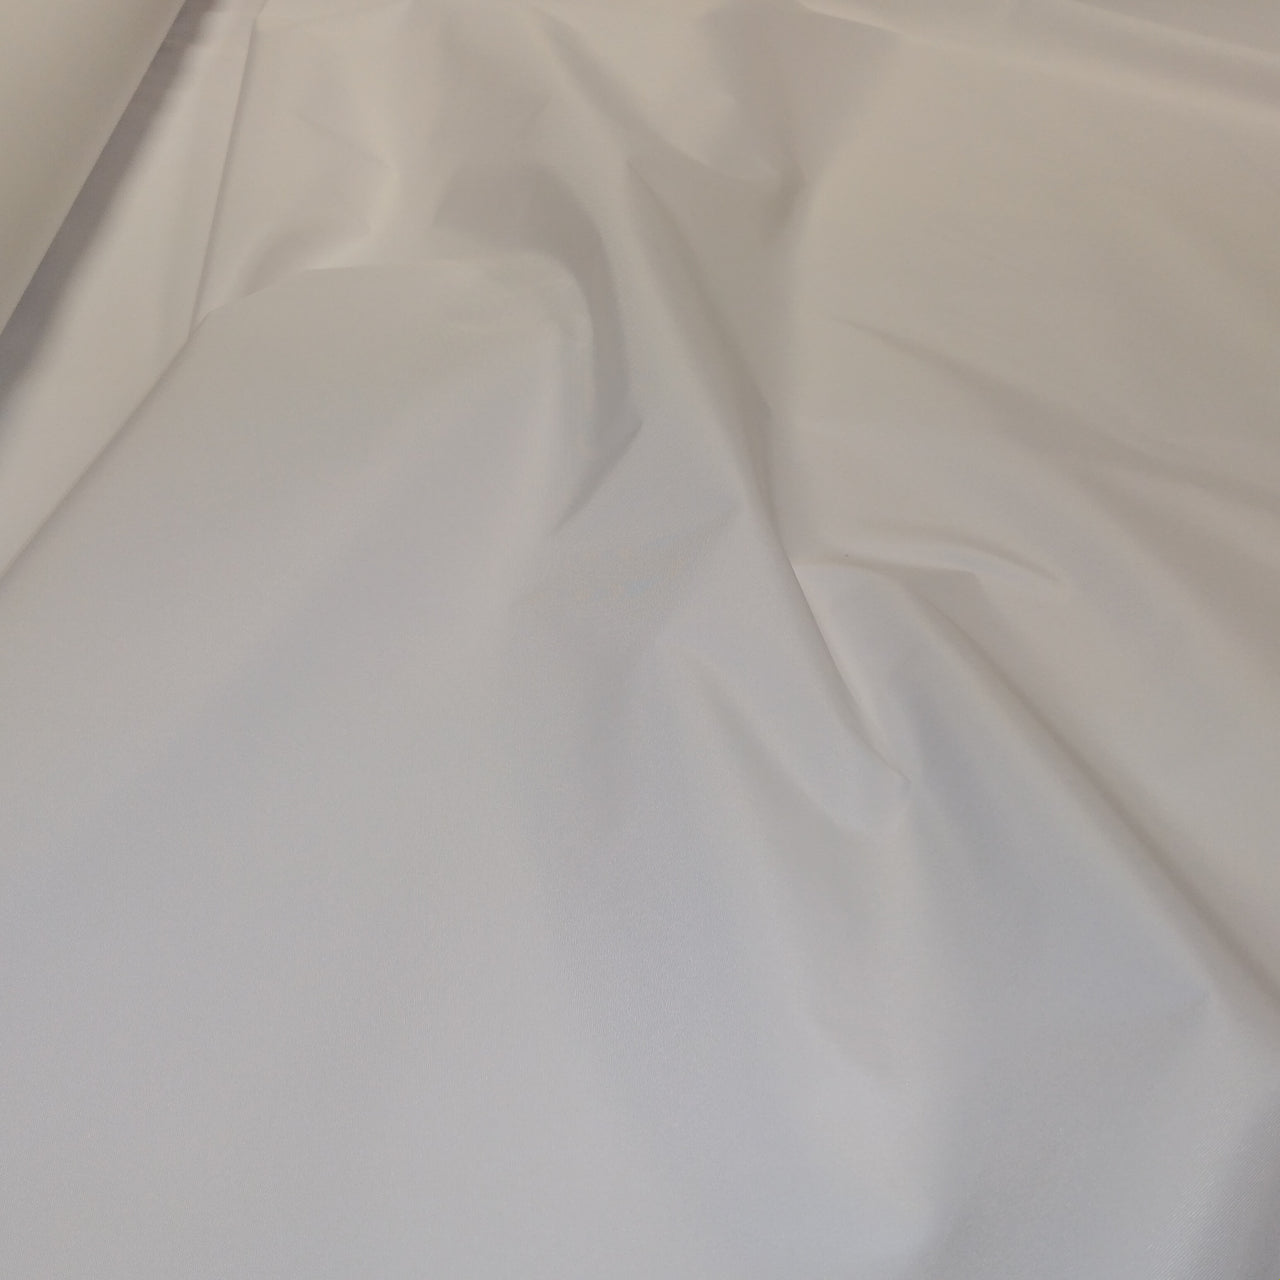 Sublimation Fabric - Superior PU coated waterproof - Prepared for Print Fabric